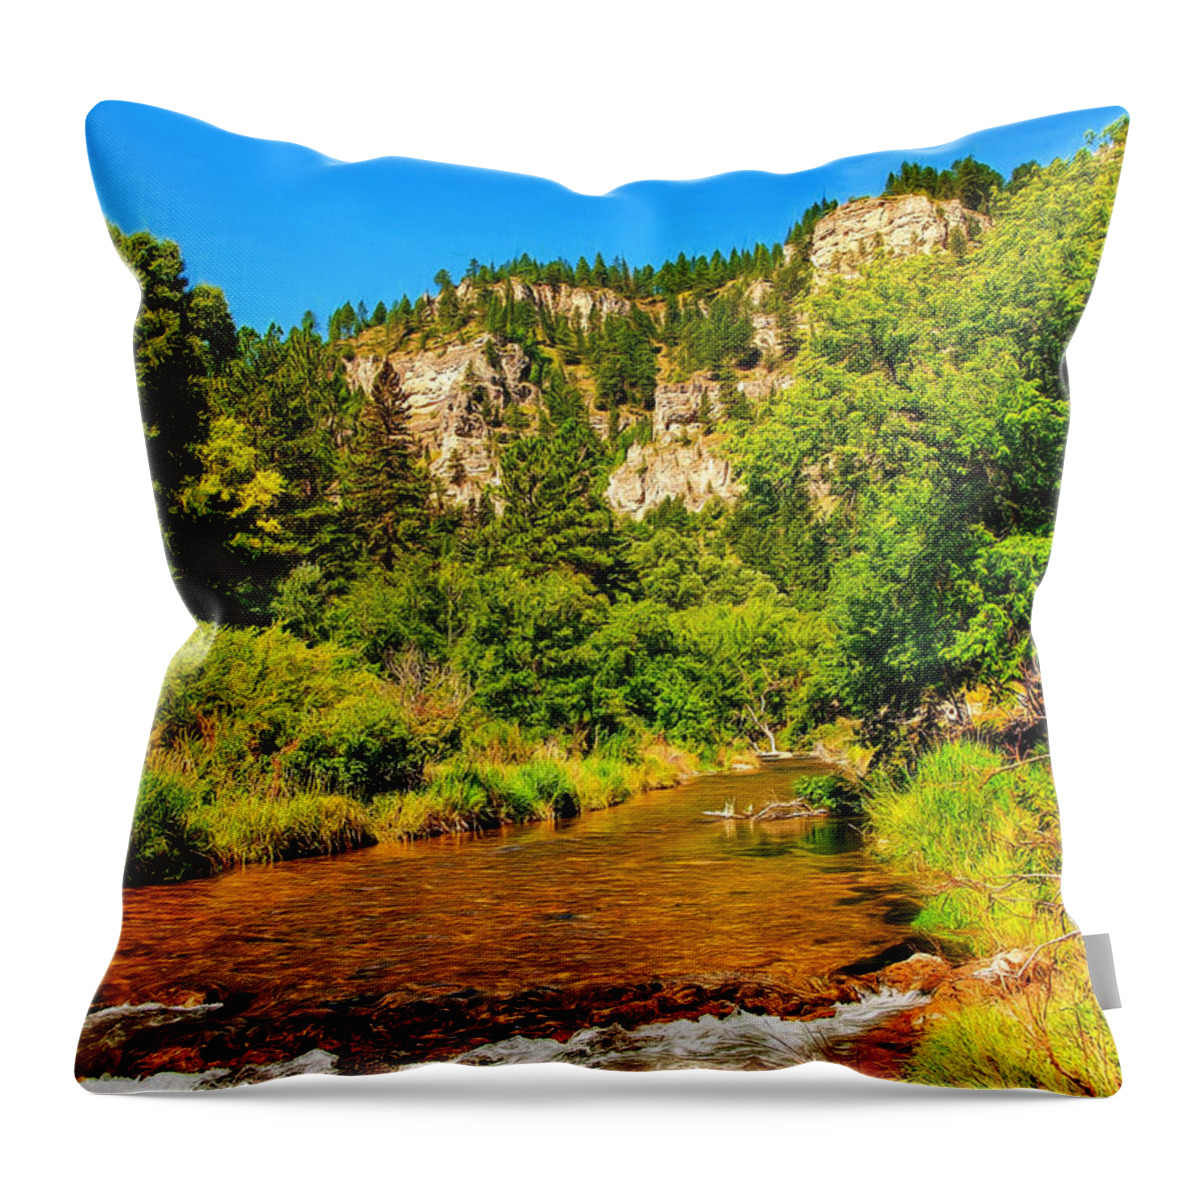 Sky Throw Pillow featuring the photograph Black Hills Beauty by John M Bailey